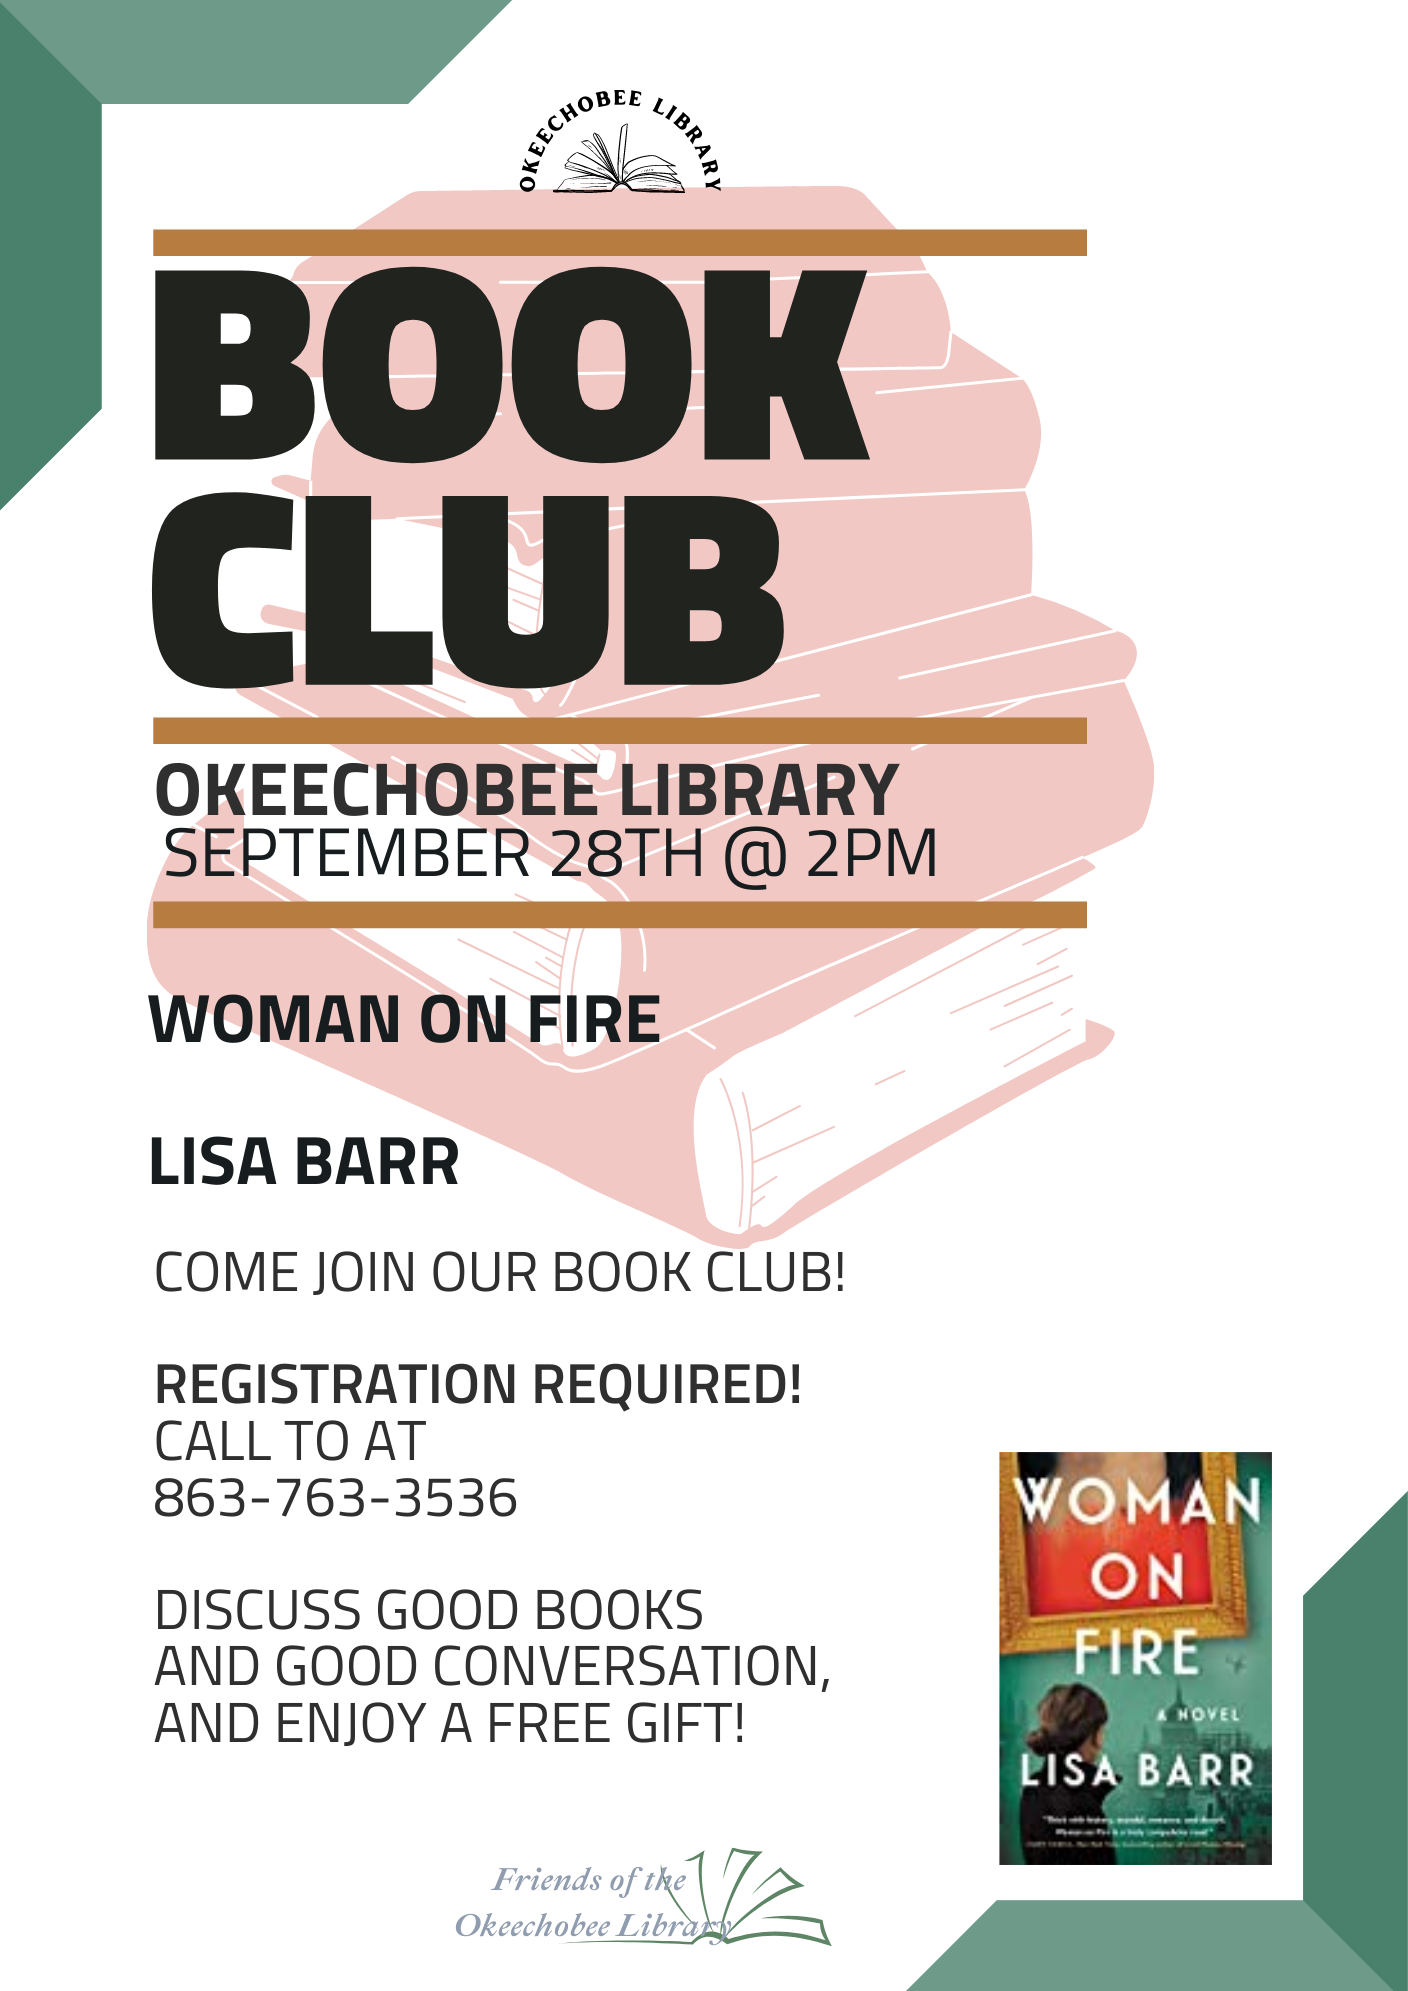 This month we will be discussing 'Woman on Fire' by Lisa Barr. Also every month we have a small FREE gift bag for attendees!